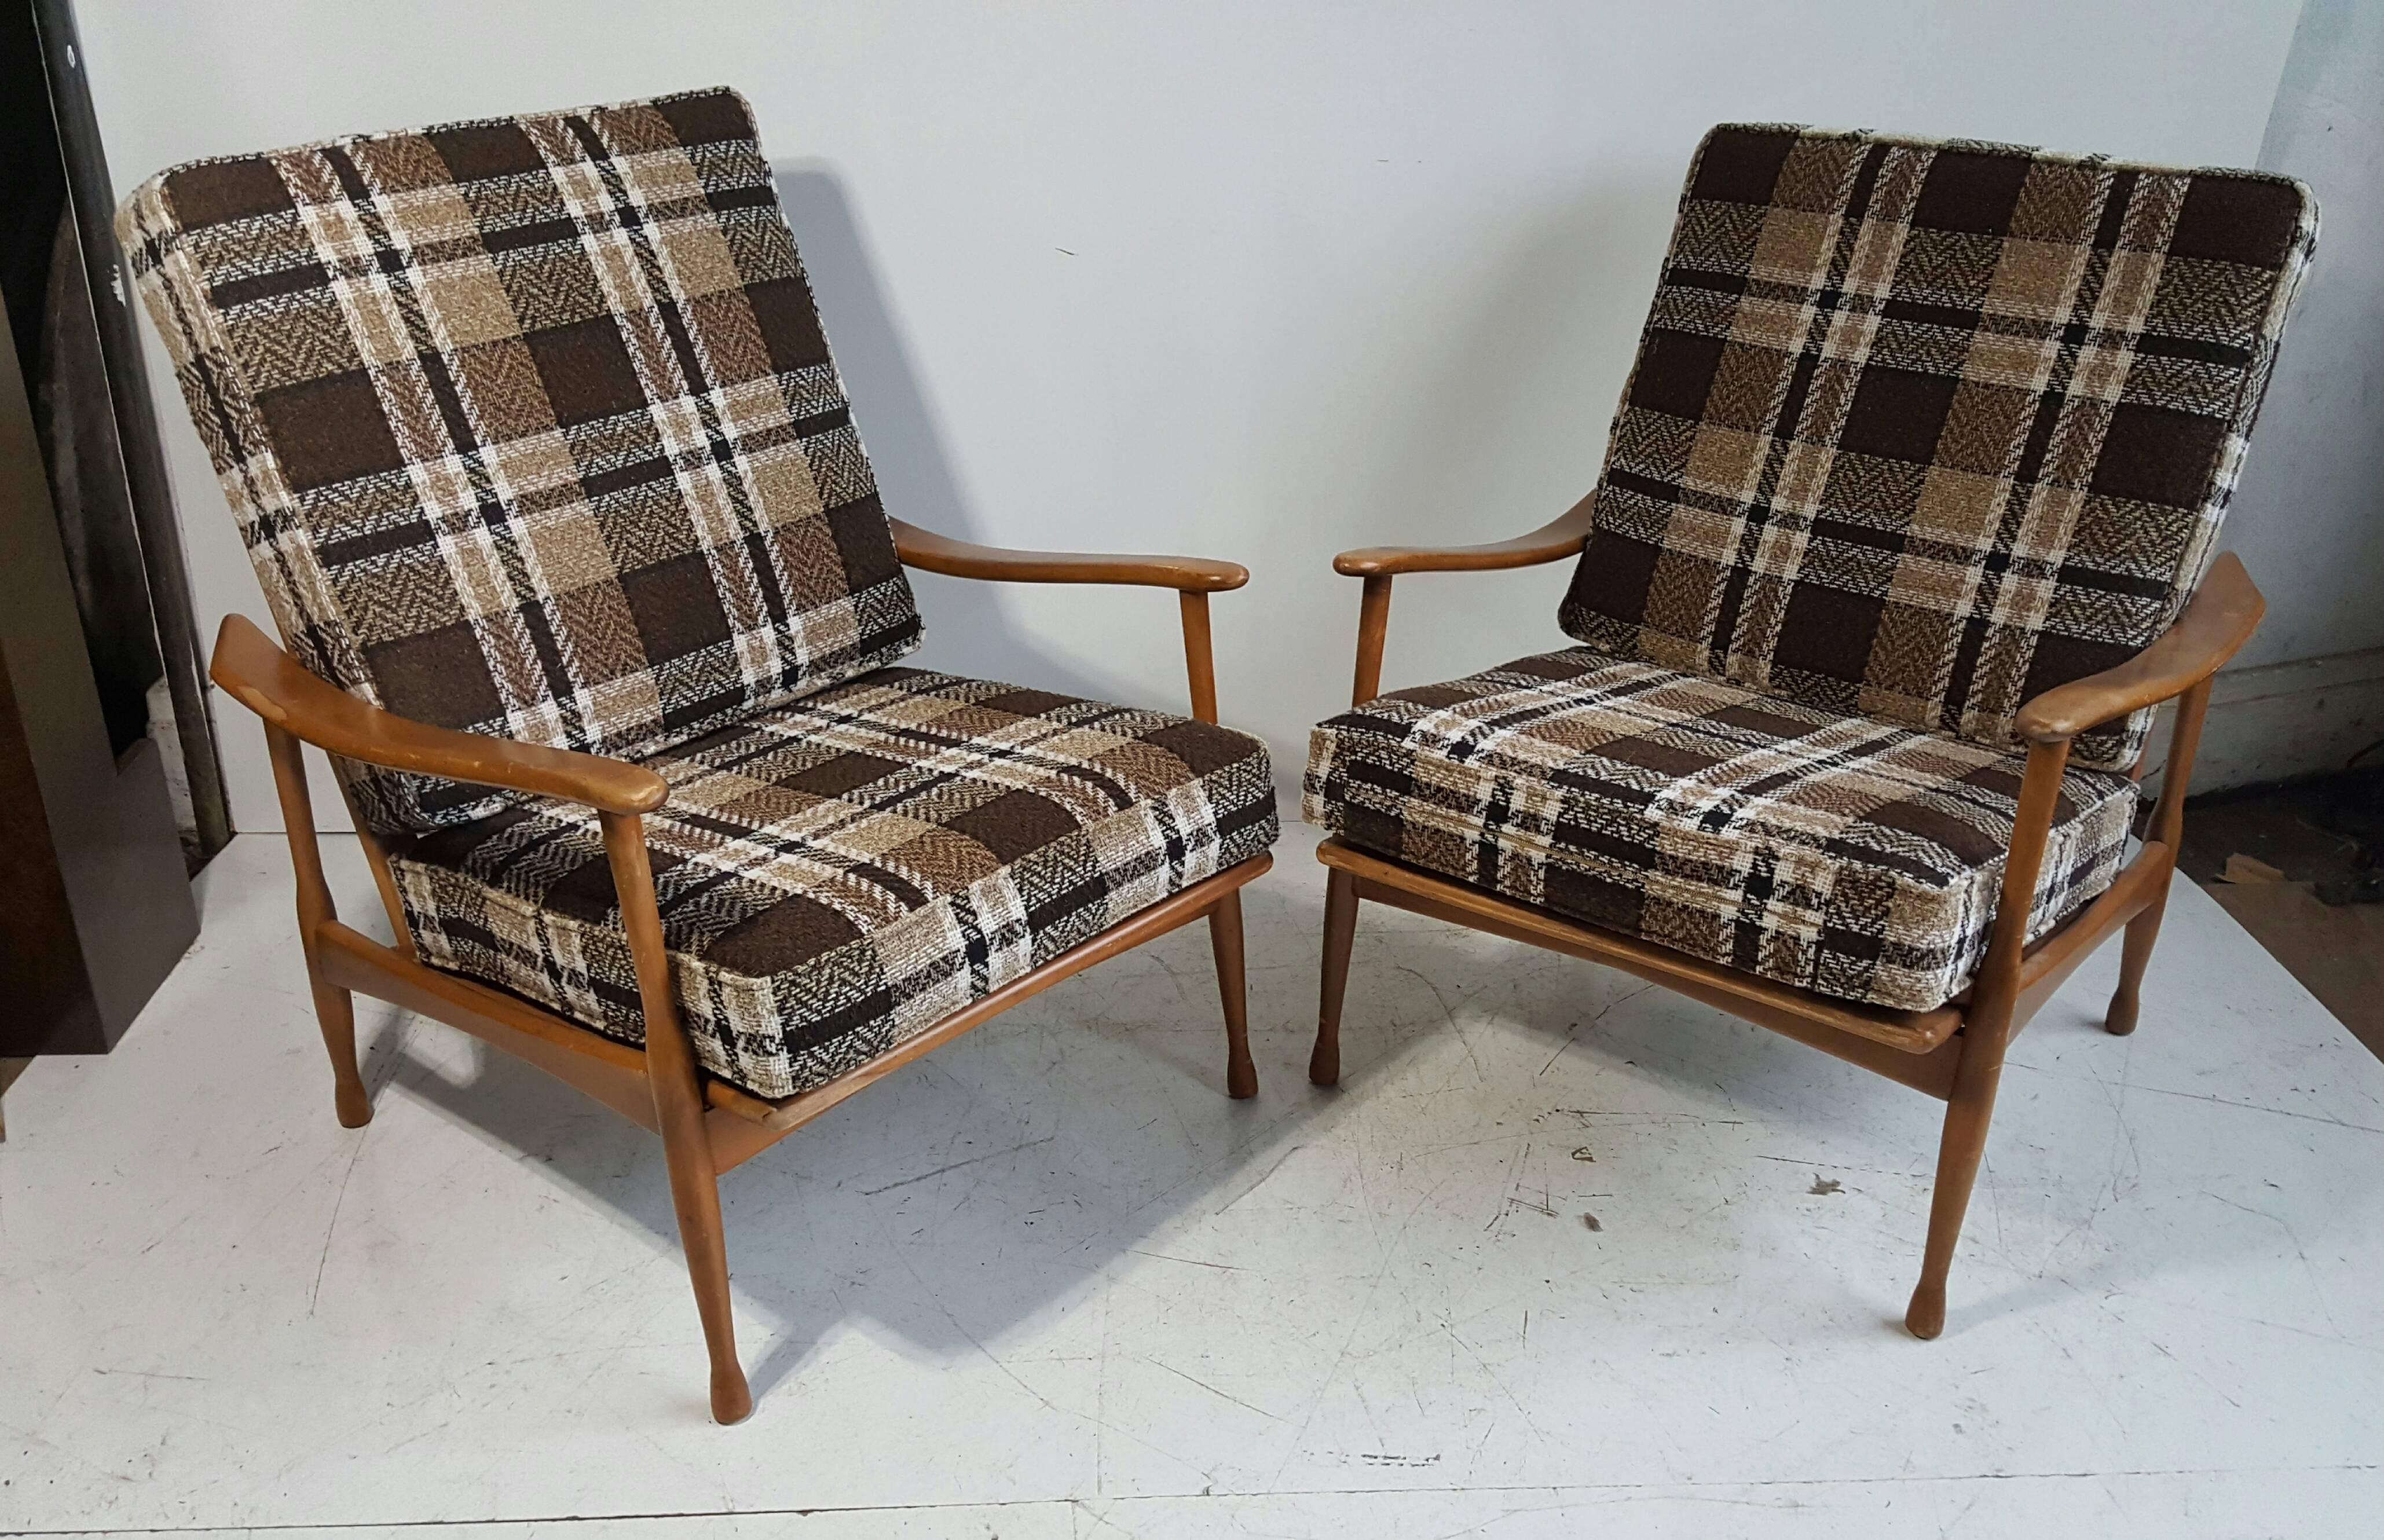 Pair of Italian modernist lounge chairs. Classic Mid-Century Modern design. Solid wood frames, four wool plaid fabric covered removable cusions, oval made in Italy ink stamp.